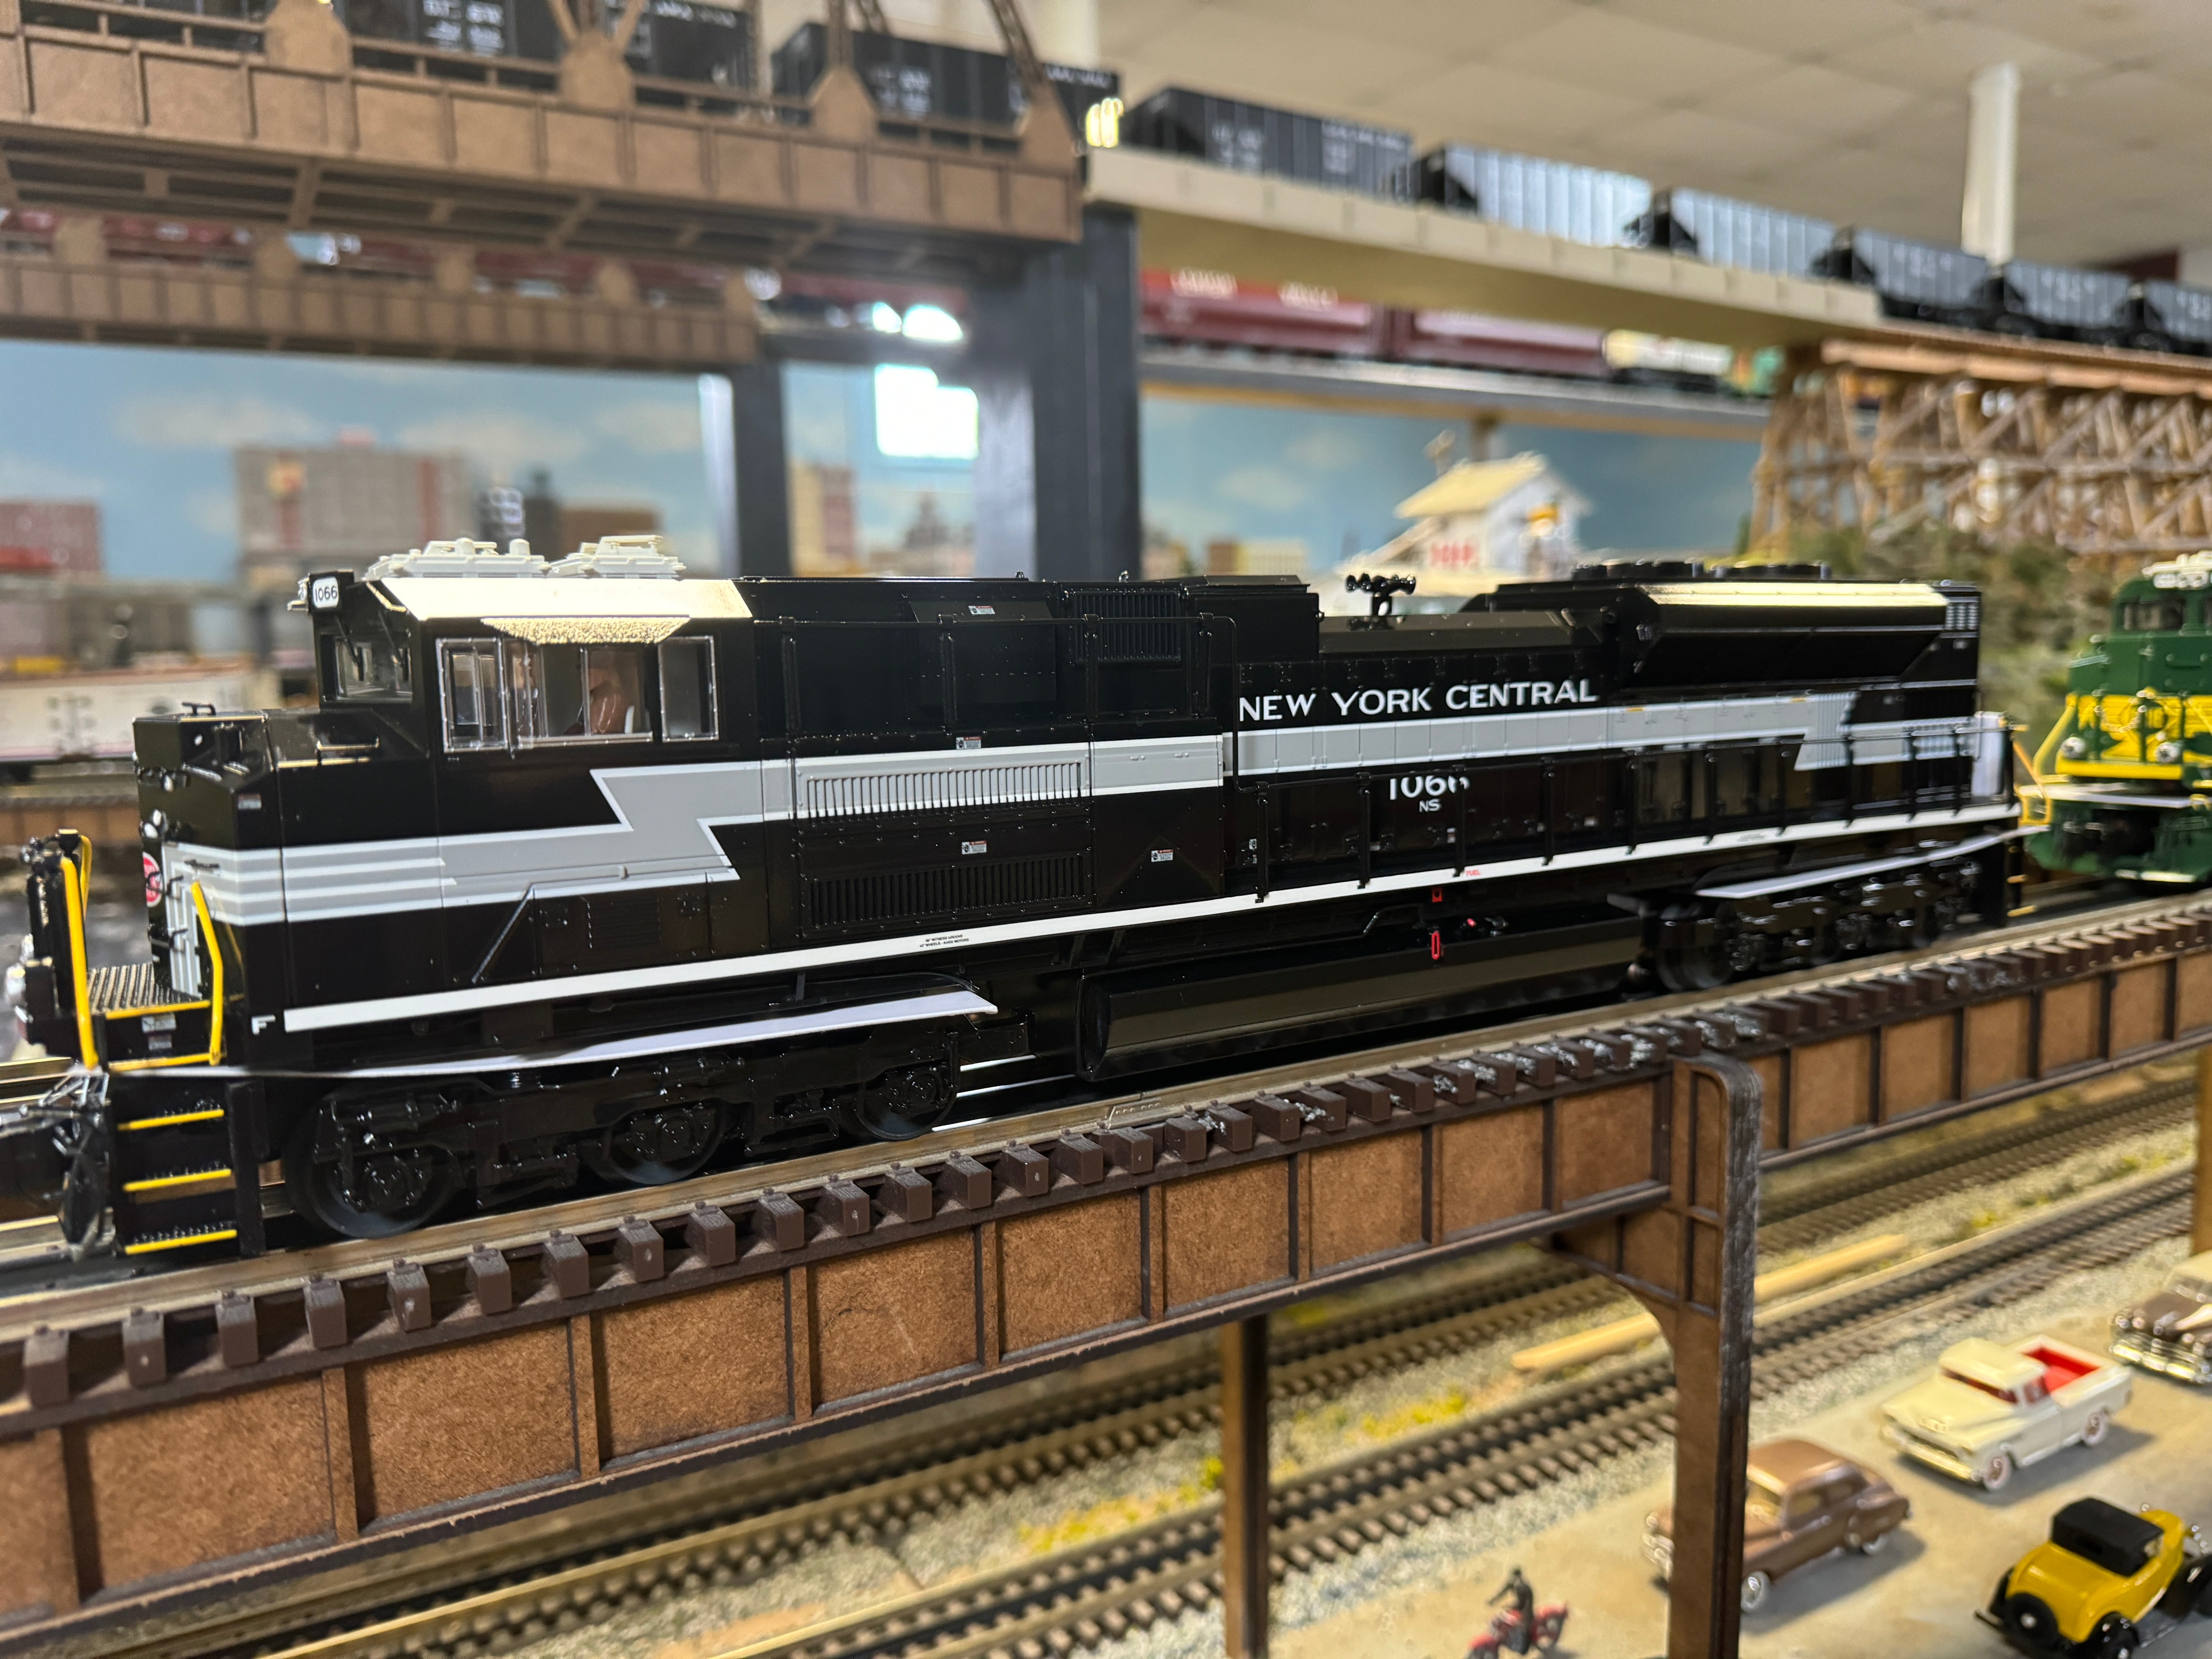 Lionel 2433080 - Legacy SD70ACE Diesel Engine "New York Central" #1066 (Norfolk Southern)